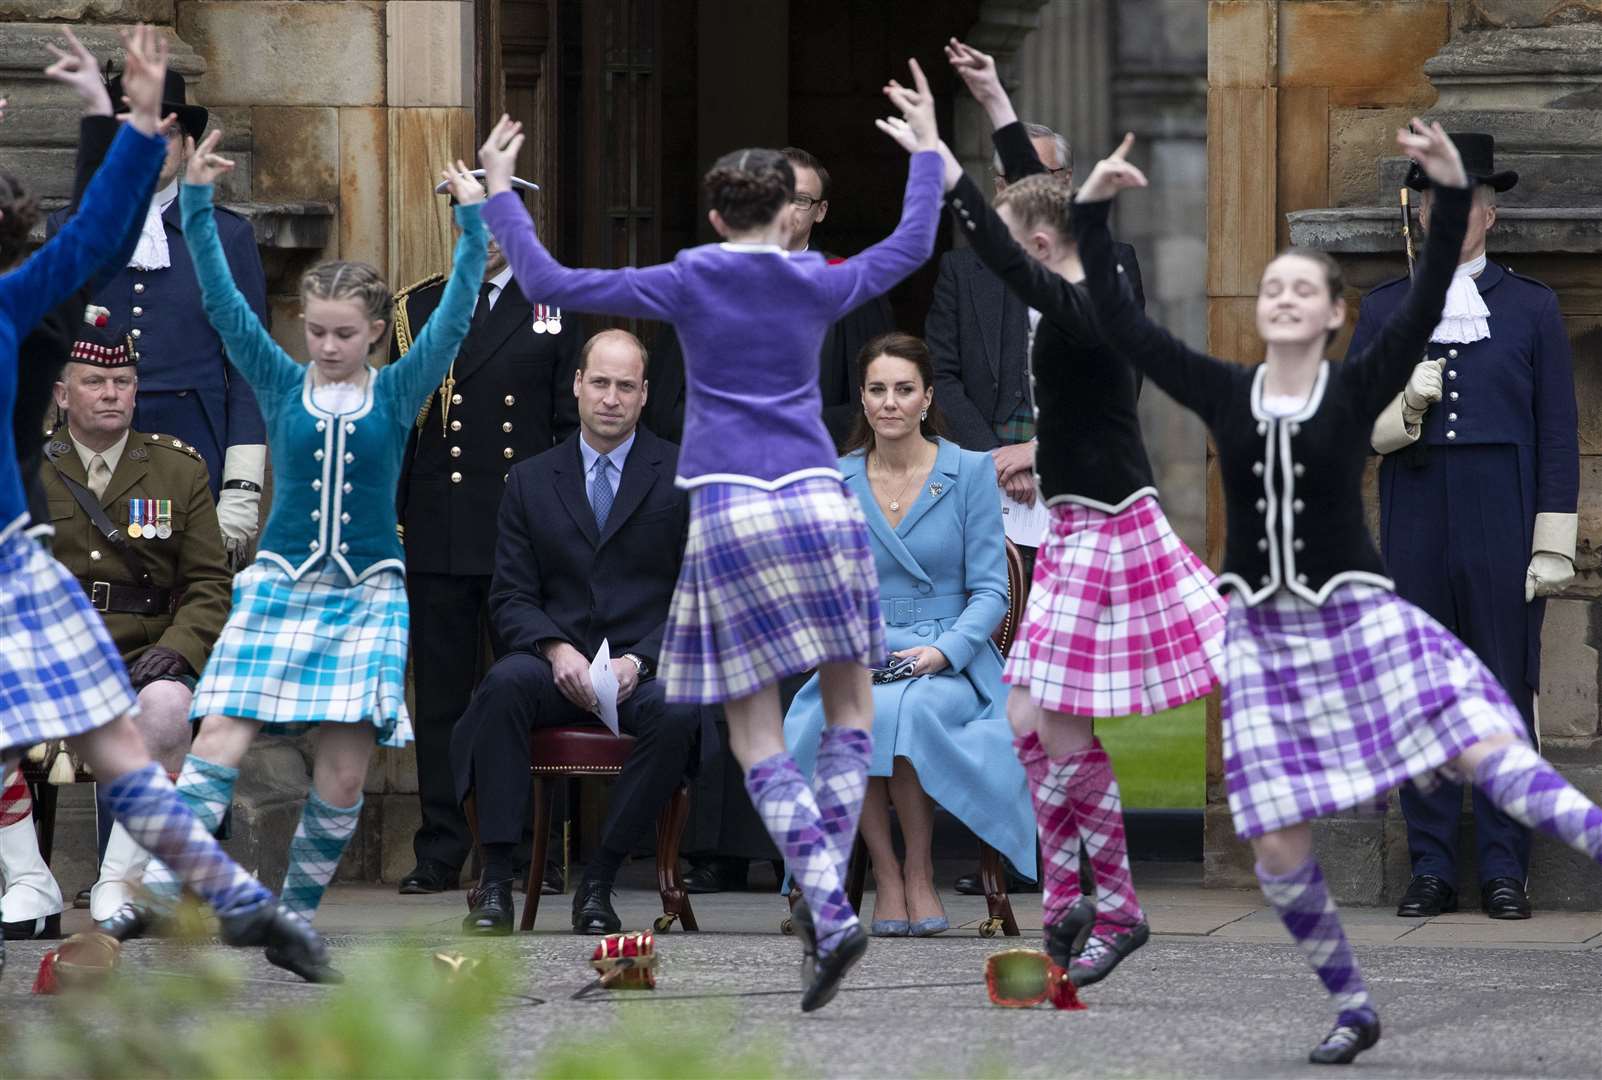 The Duke and Duchess of Cambridge watch Highland dancers perform at the Beating of the Retreat at the Palace of Holyroodhouse in Edinburgh (Jane Barlow/PA)